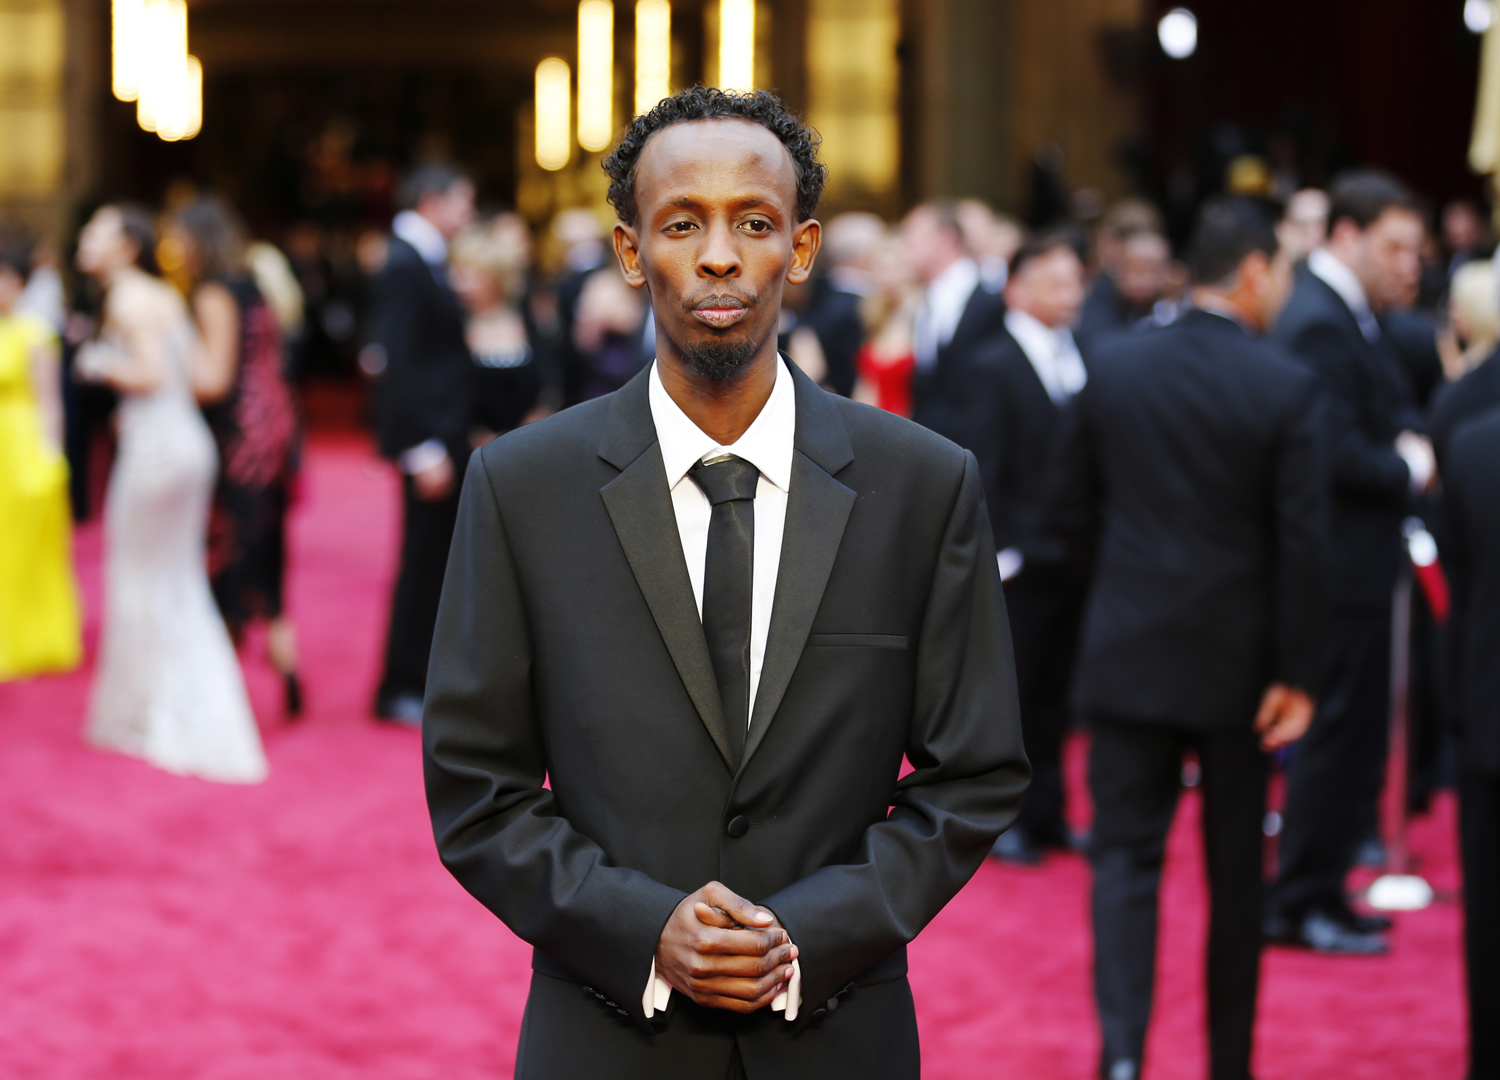 Abdi, best supporting actor nominee for his role in "Captain Phillips", arrives at the 86th Academy Awards in Hollywood